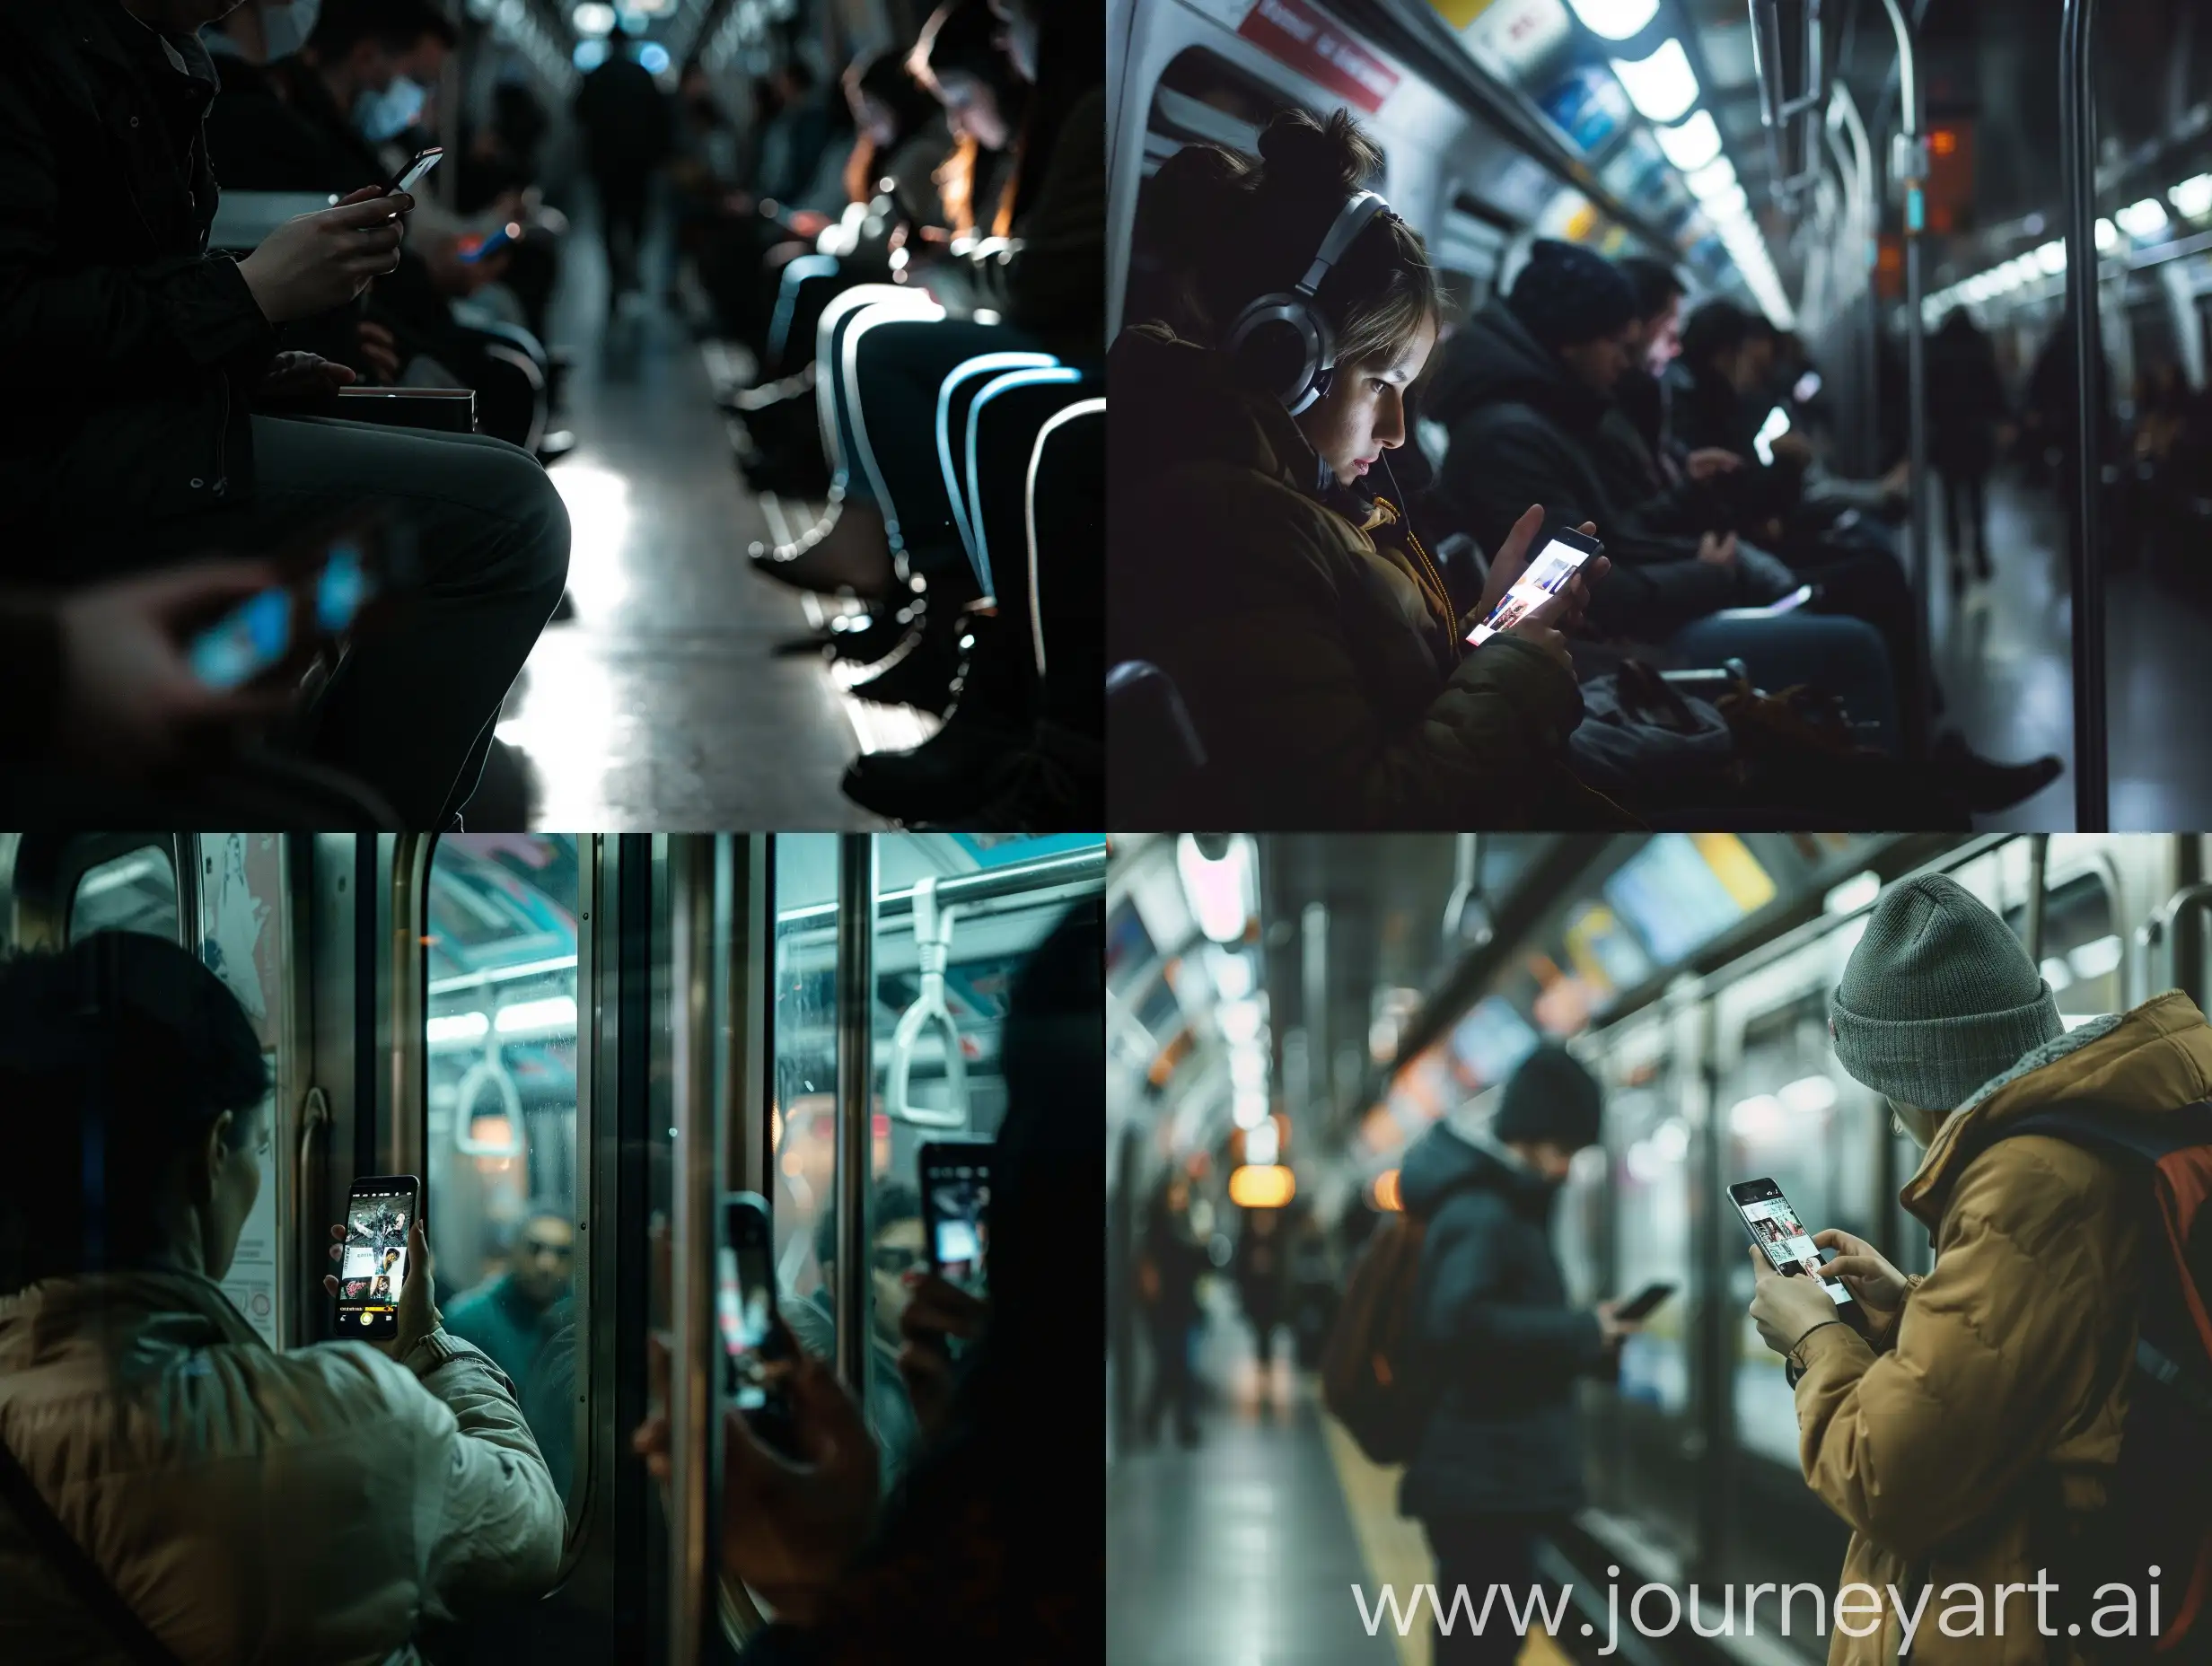 minimalist editorial photograph people watching videos and scrolling in metro, luminous shadowing, focus on the phone and videos, style raw